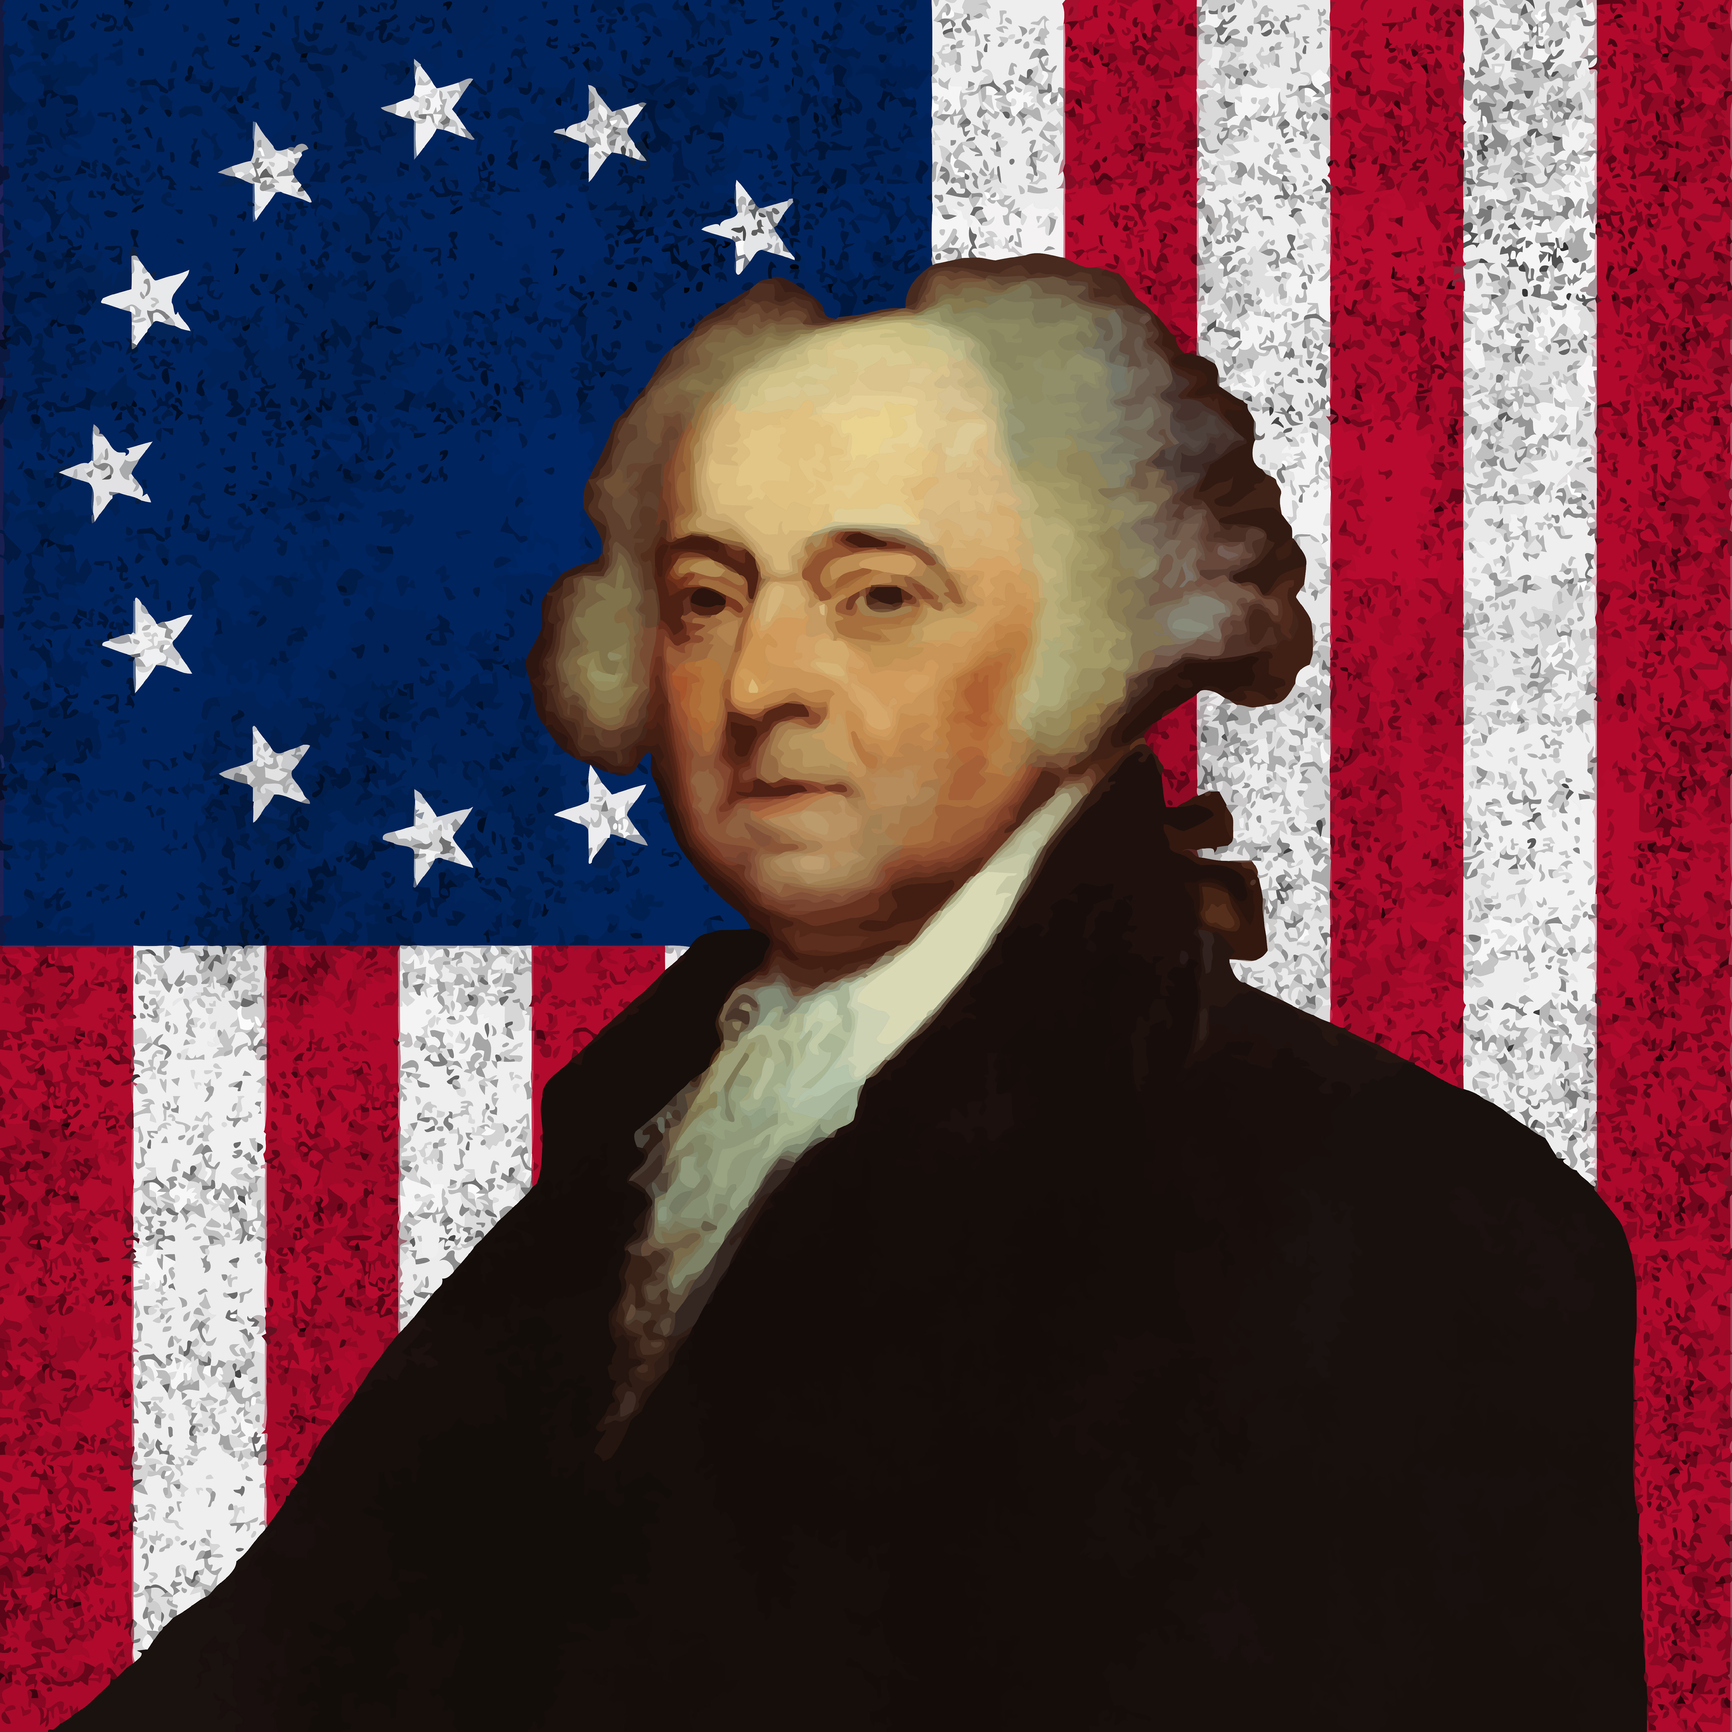 Digitally restored vector portrait of John Adams against the American Flag. John Adams was an American Founding Father, Continental Congress Delegate, Vice-President, and President.